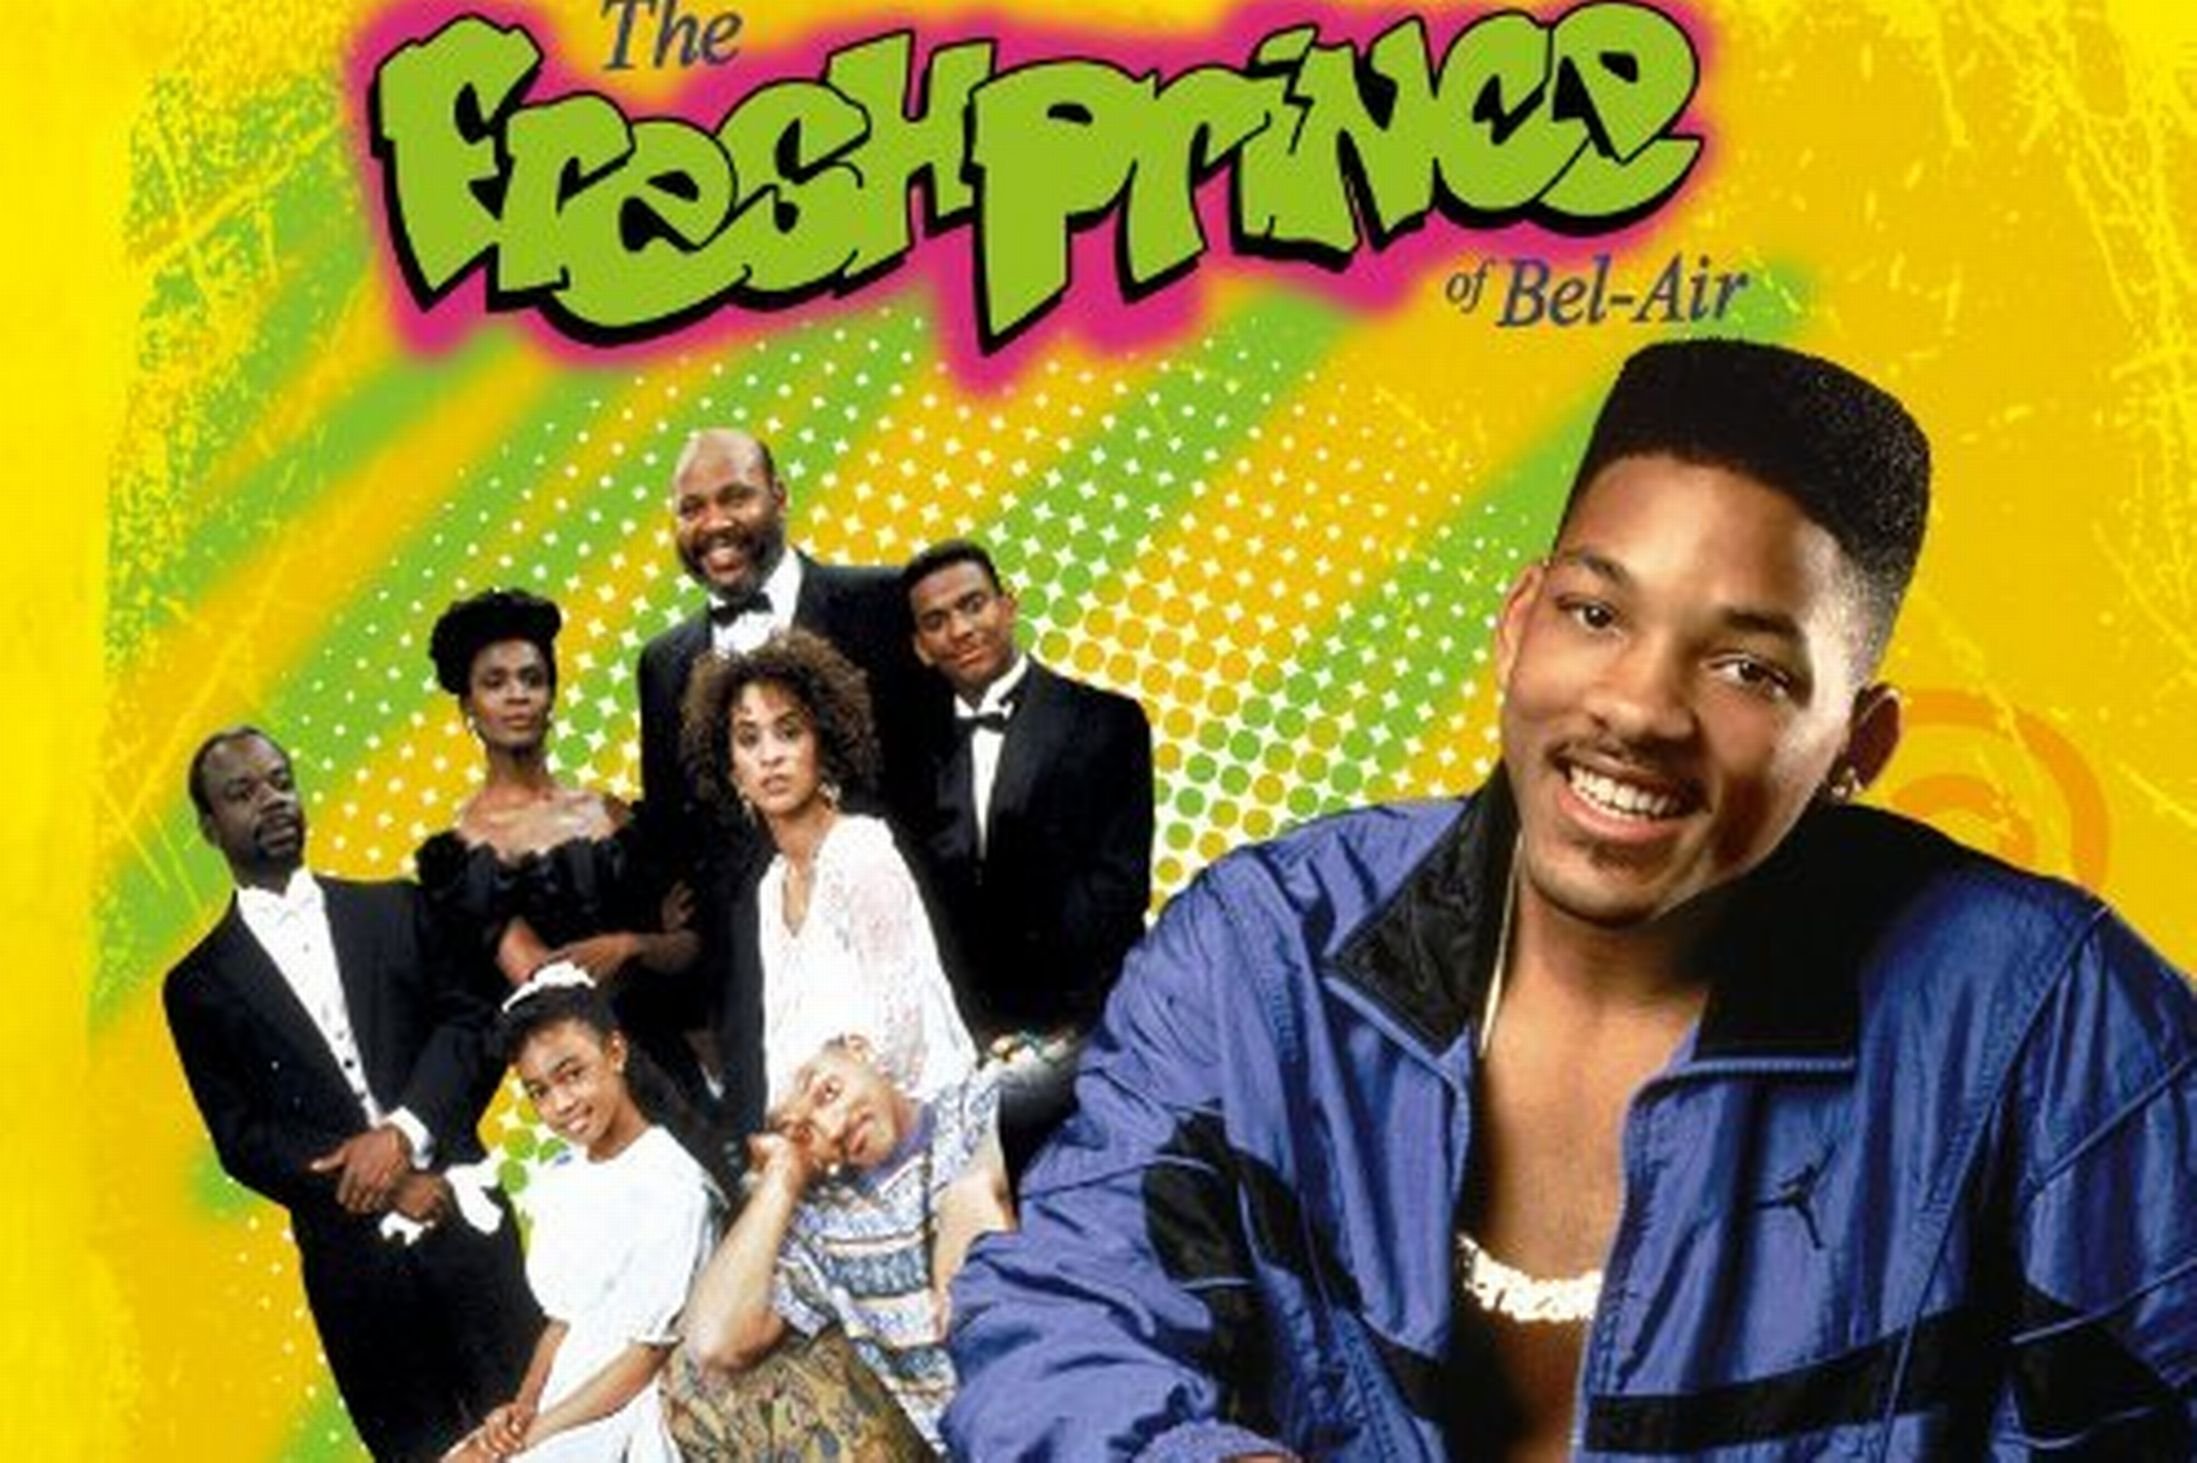 fresh prince of bel air, Comedy, Sitcom, Series, Television, Will, Smith, Fresh, Prince, Bel, Air, Poster Wallpaper